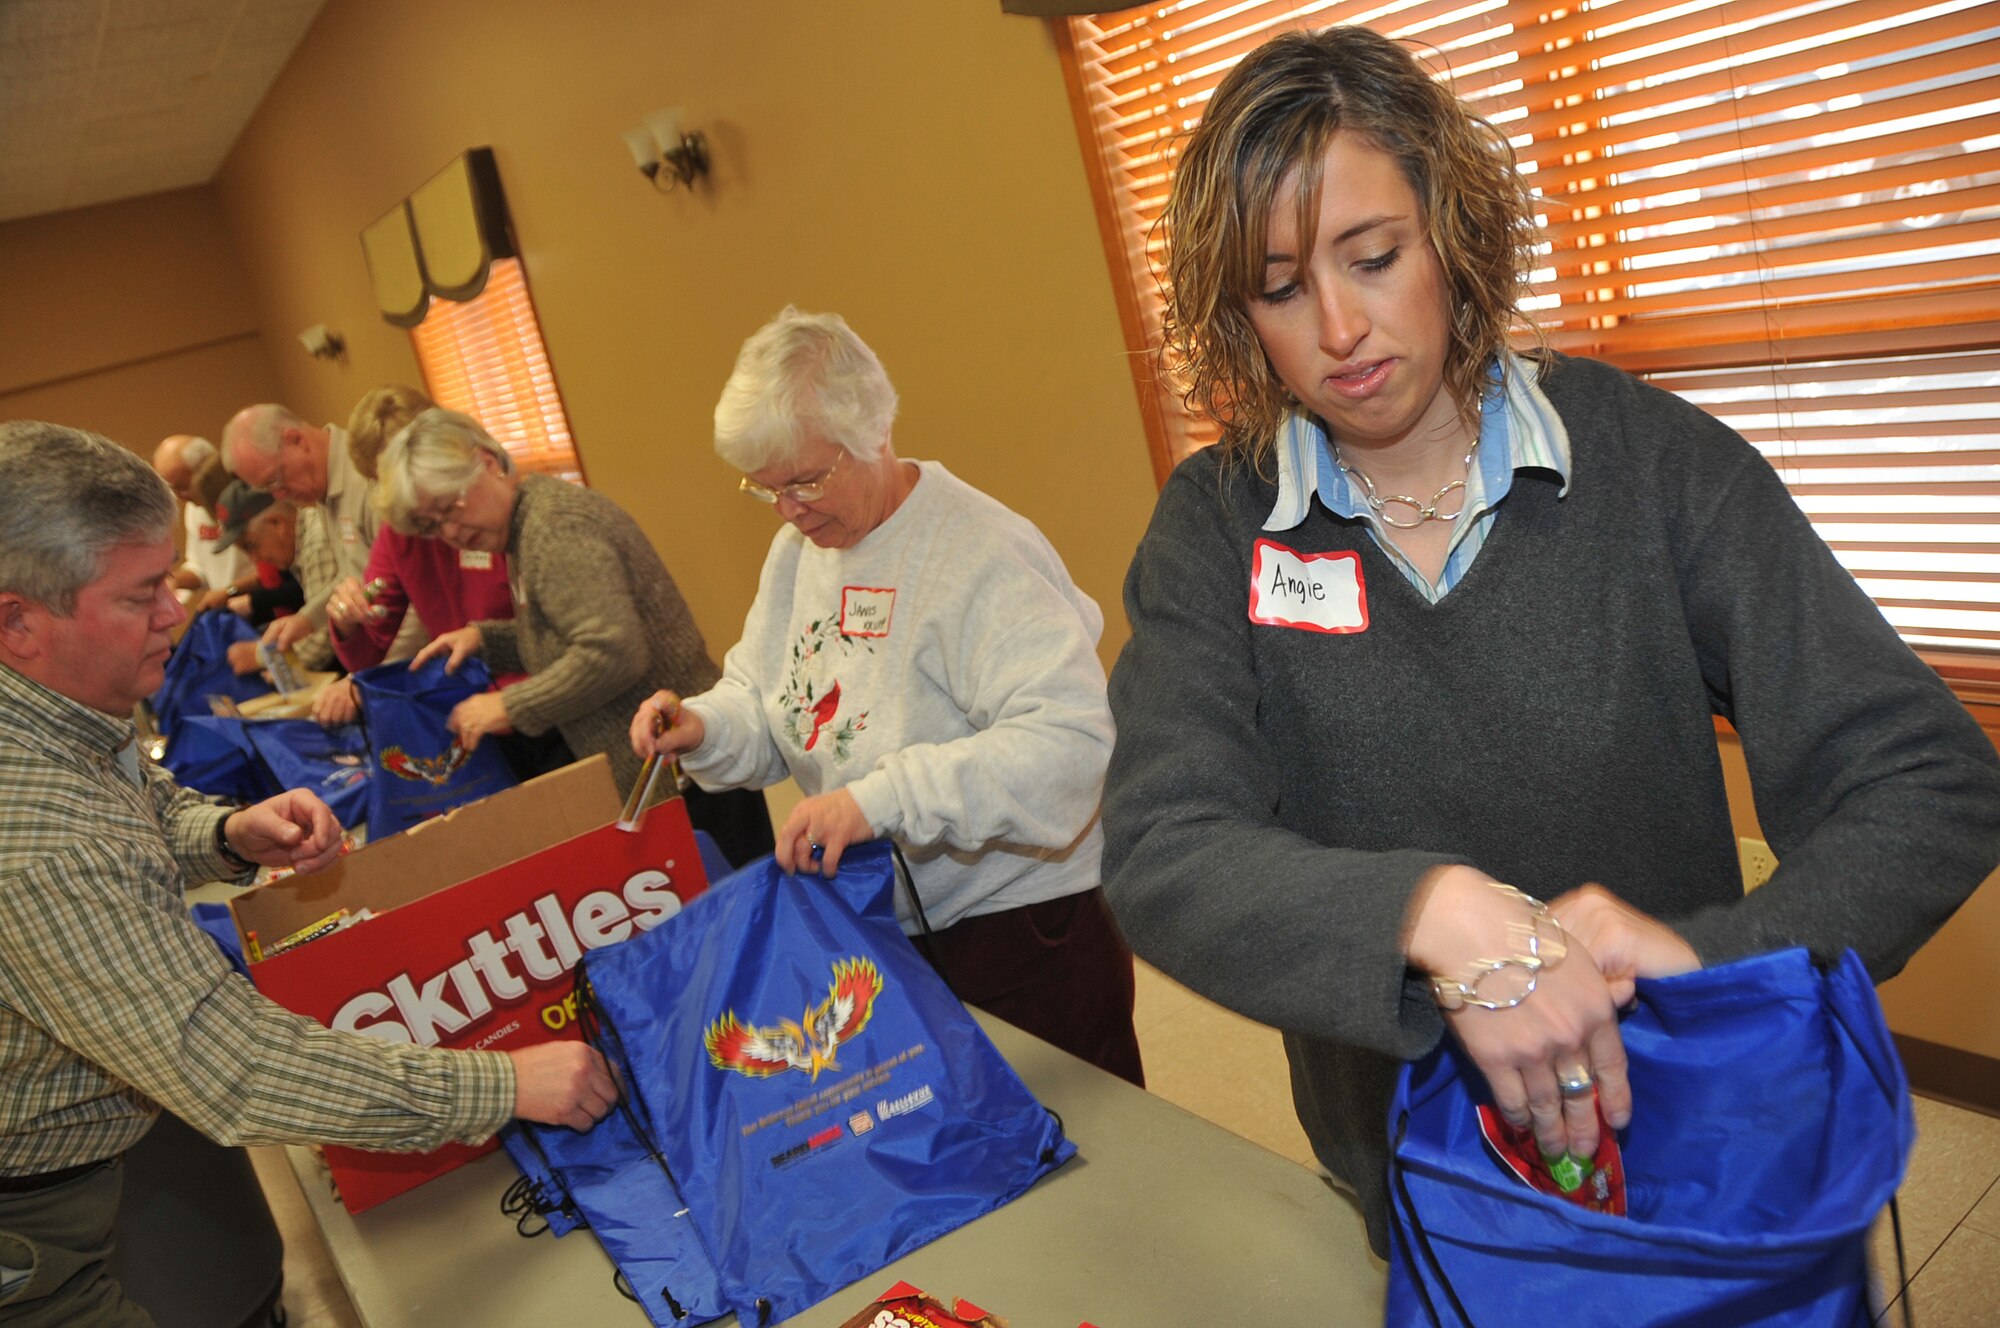 OFFUTT AIR FORCE BASE, Neb. - Angie Wade, a graphic designer for Bellevue Public Schools, helps fill holiday cheer bags for the Bellevue Chamber of Commerce on Dec. 13. Military members and civilians were on hand to fill snack bags up for local dorm residents at Offutt. U.S. Air Force Photo by Jeff W. Gates (Released)